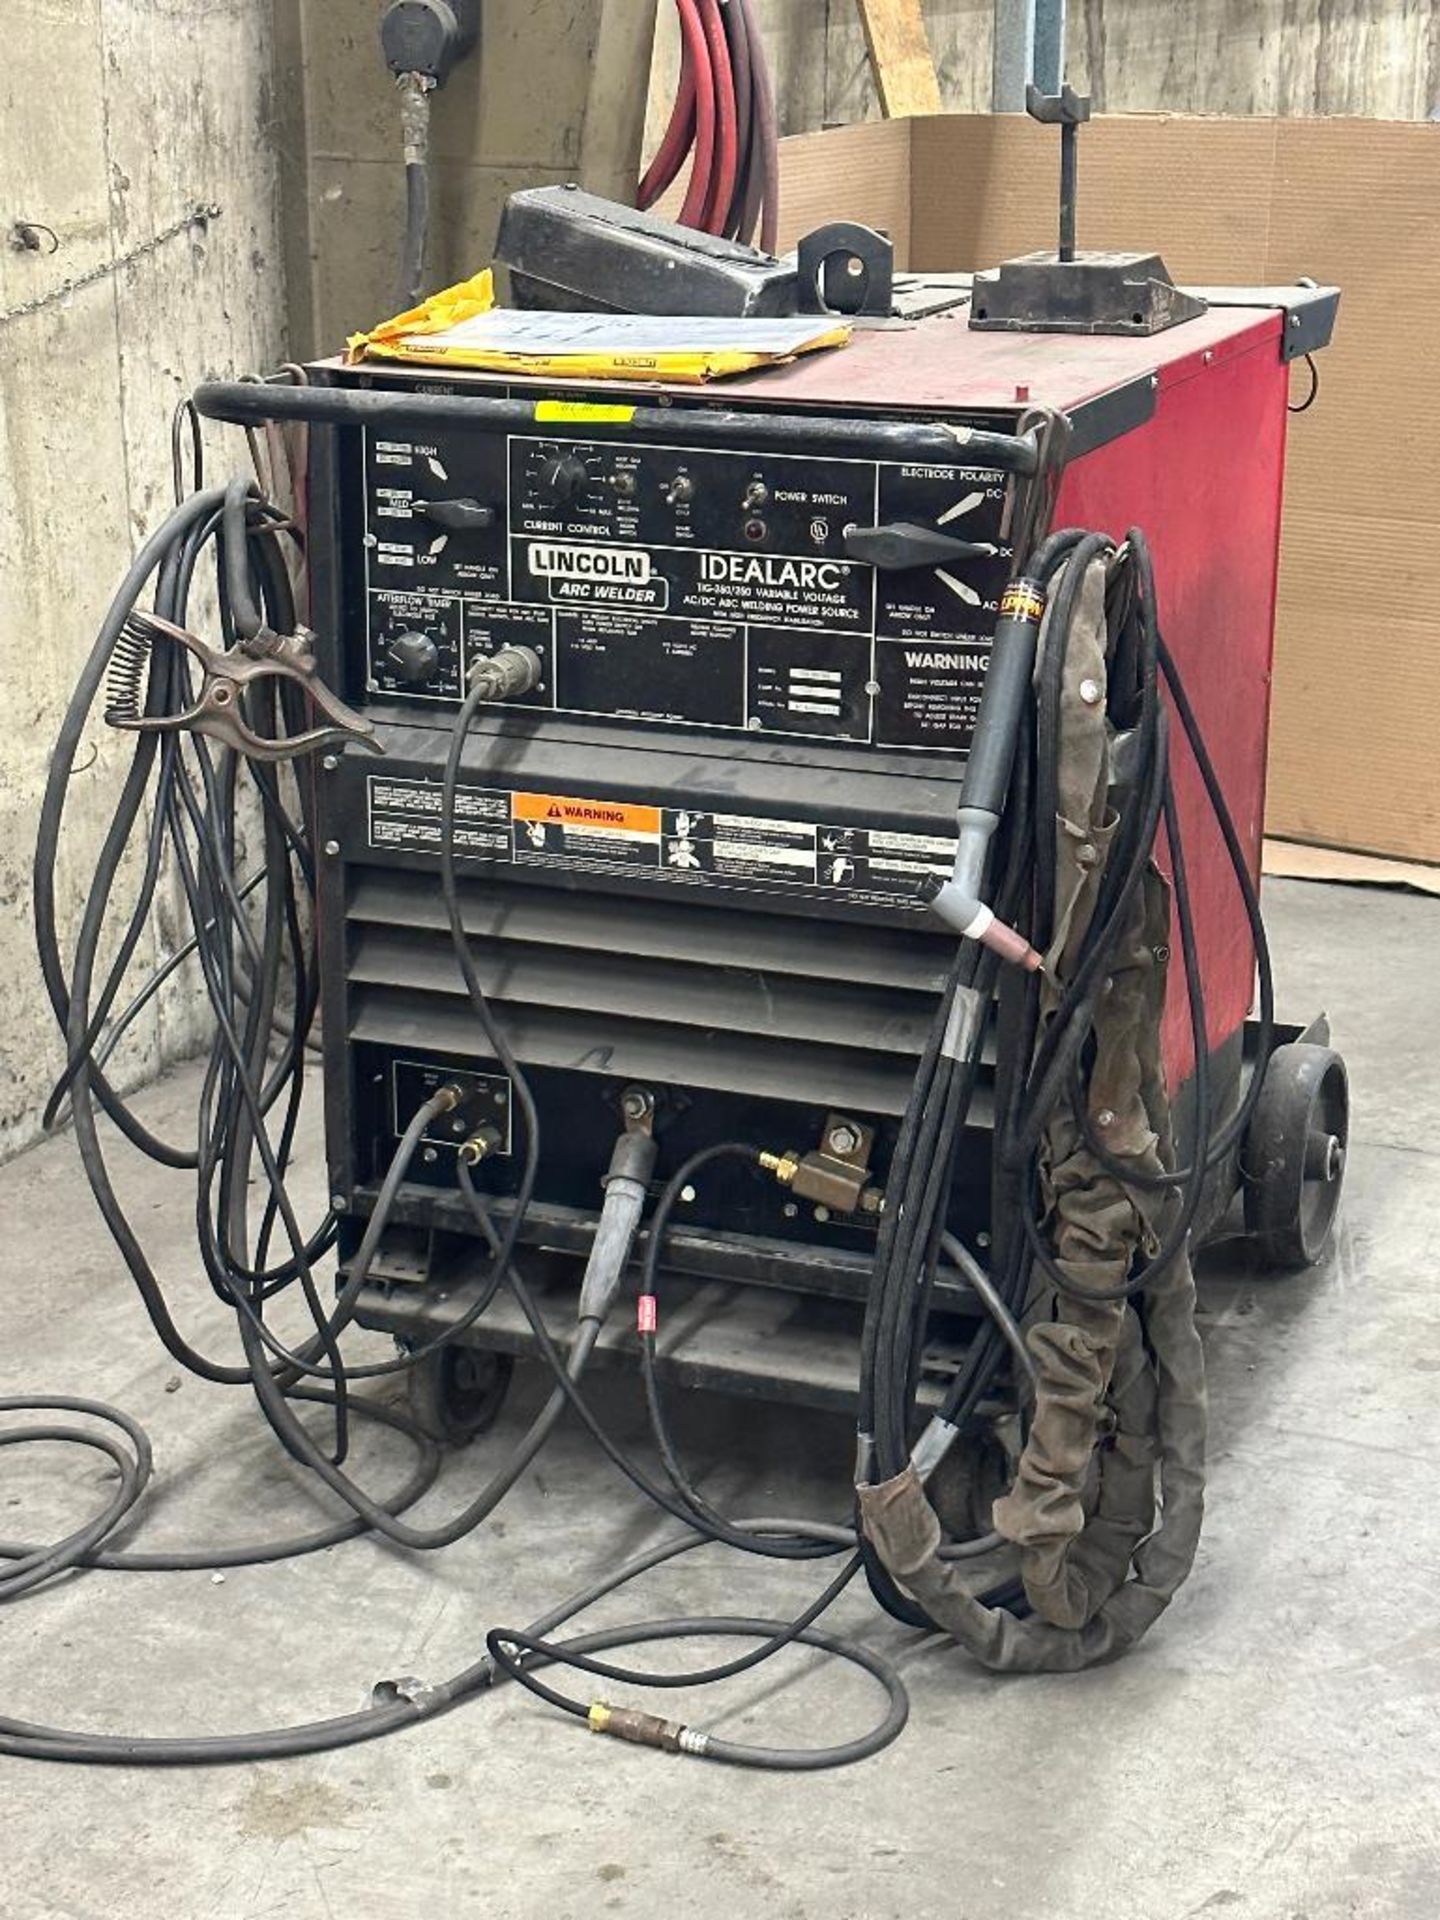 LINCOLN IDEALARC VARIABLE VOLTAGE ARC WELDER WITH LEADS AND ADDITIONAL FUEL TANK - Image 2 of 10